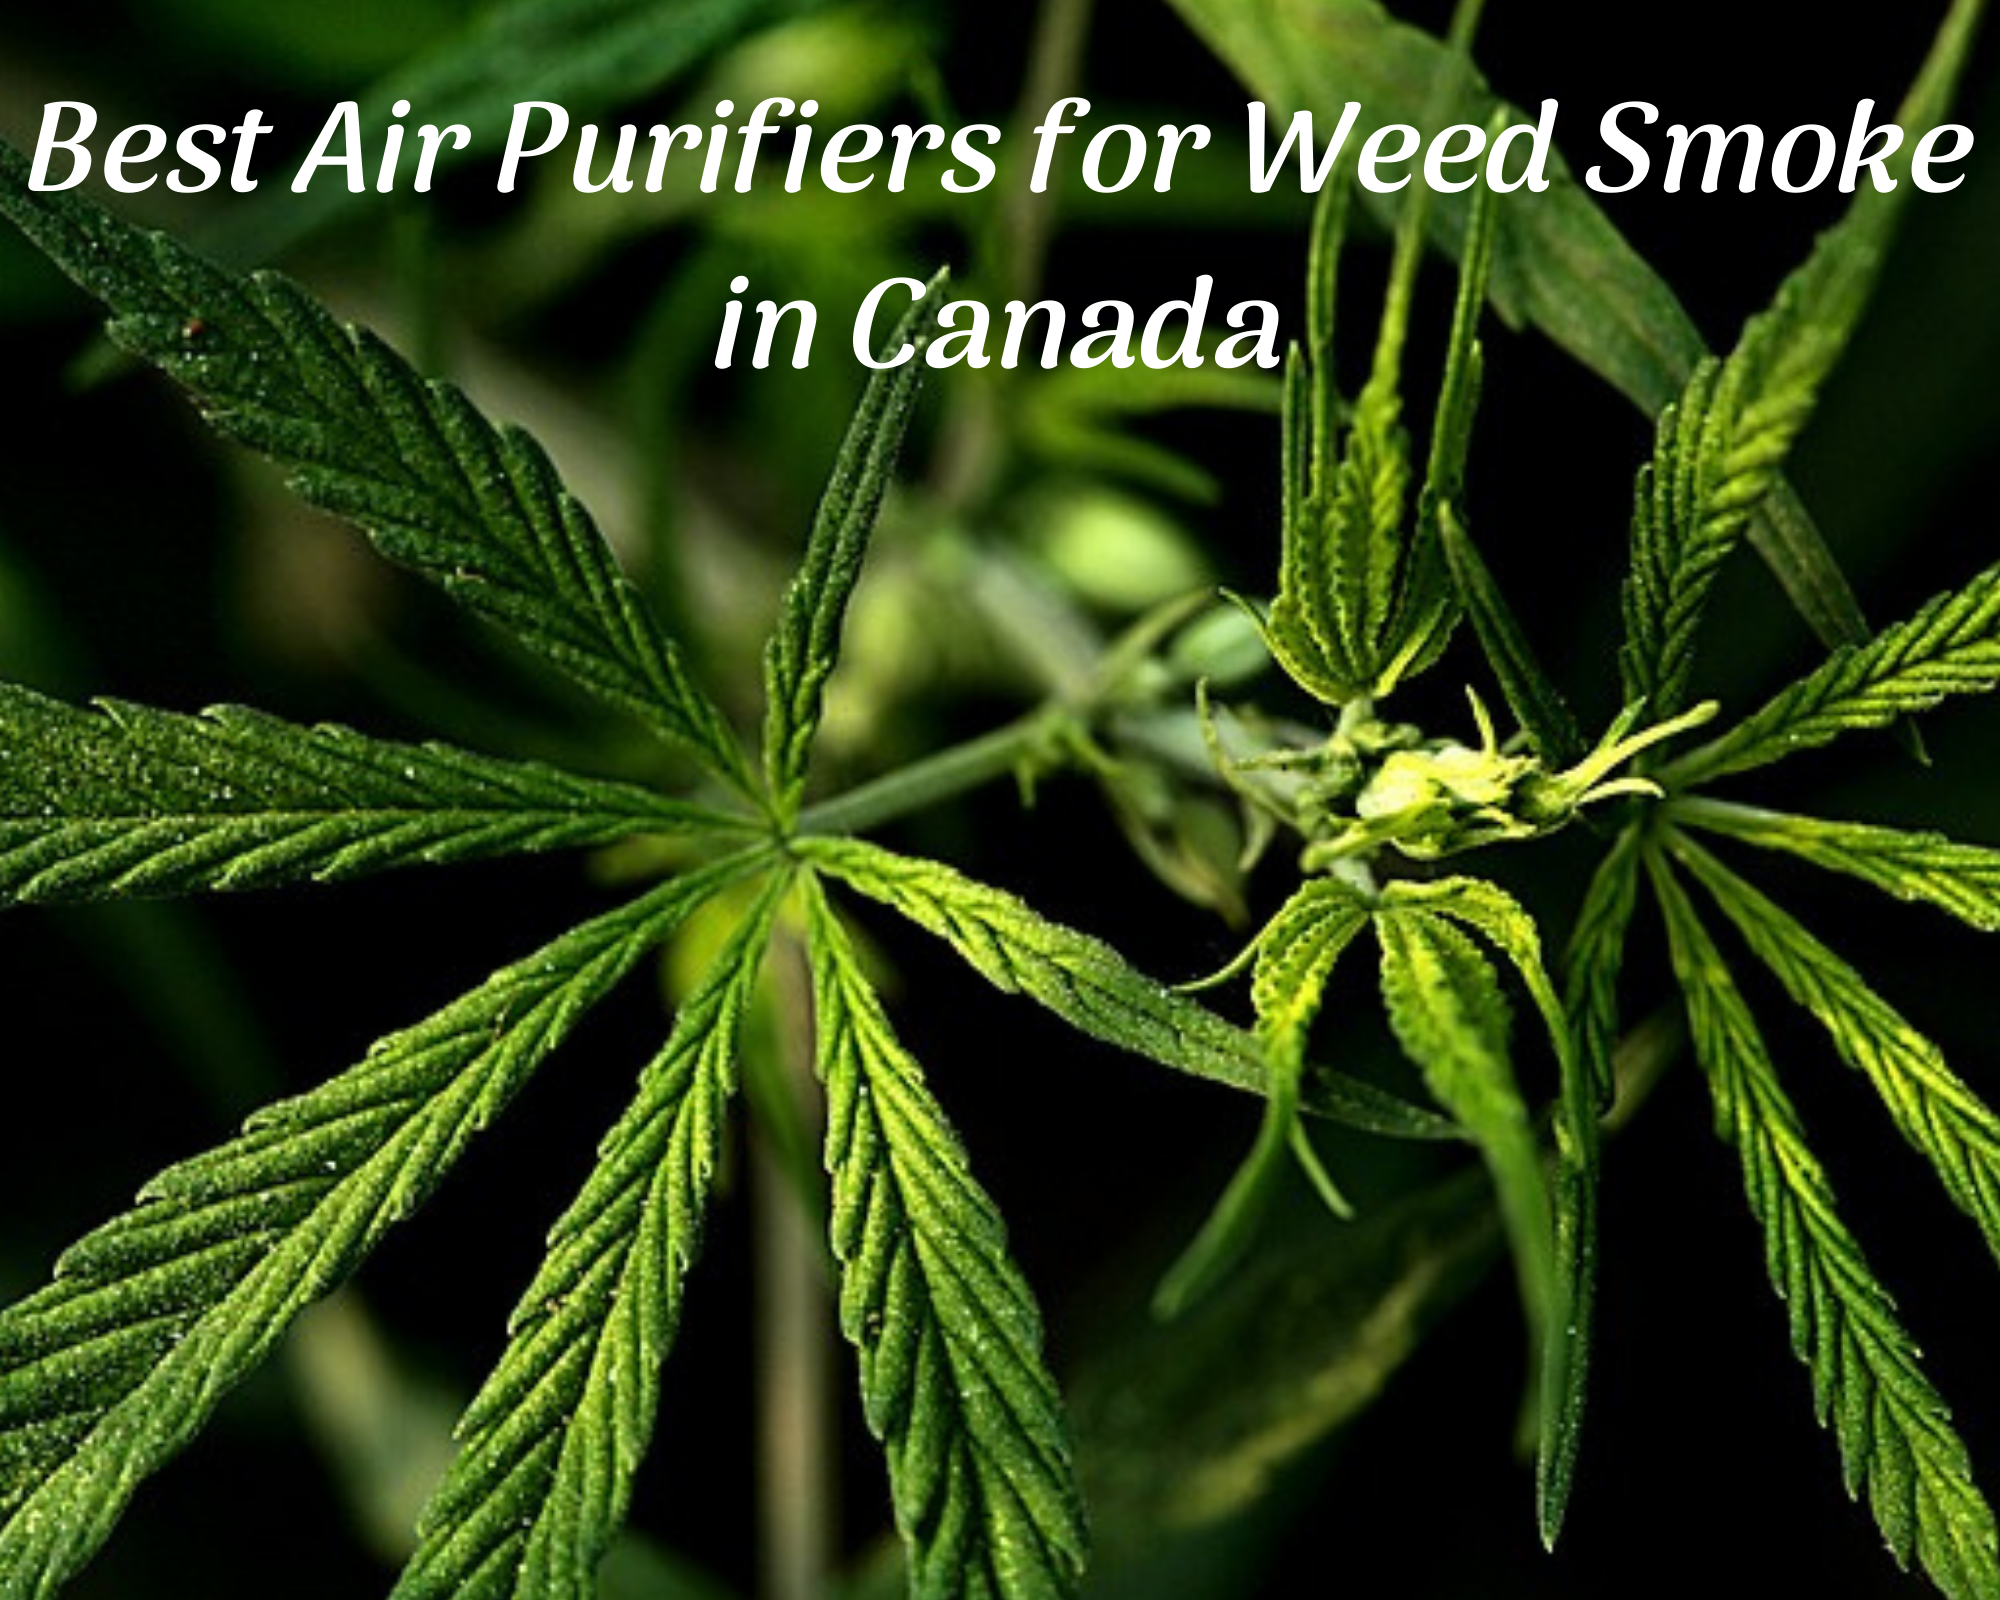 Best Air Purifier for Weed Smoke Canada - Best Air Purifier for Marijuana Smoke Canada - Best Air Purifier for Cannabis Smoke Canada